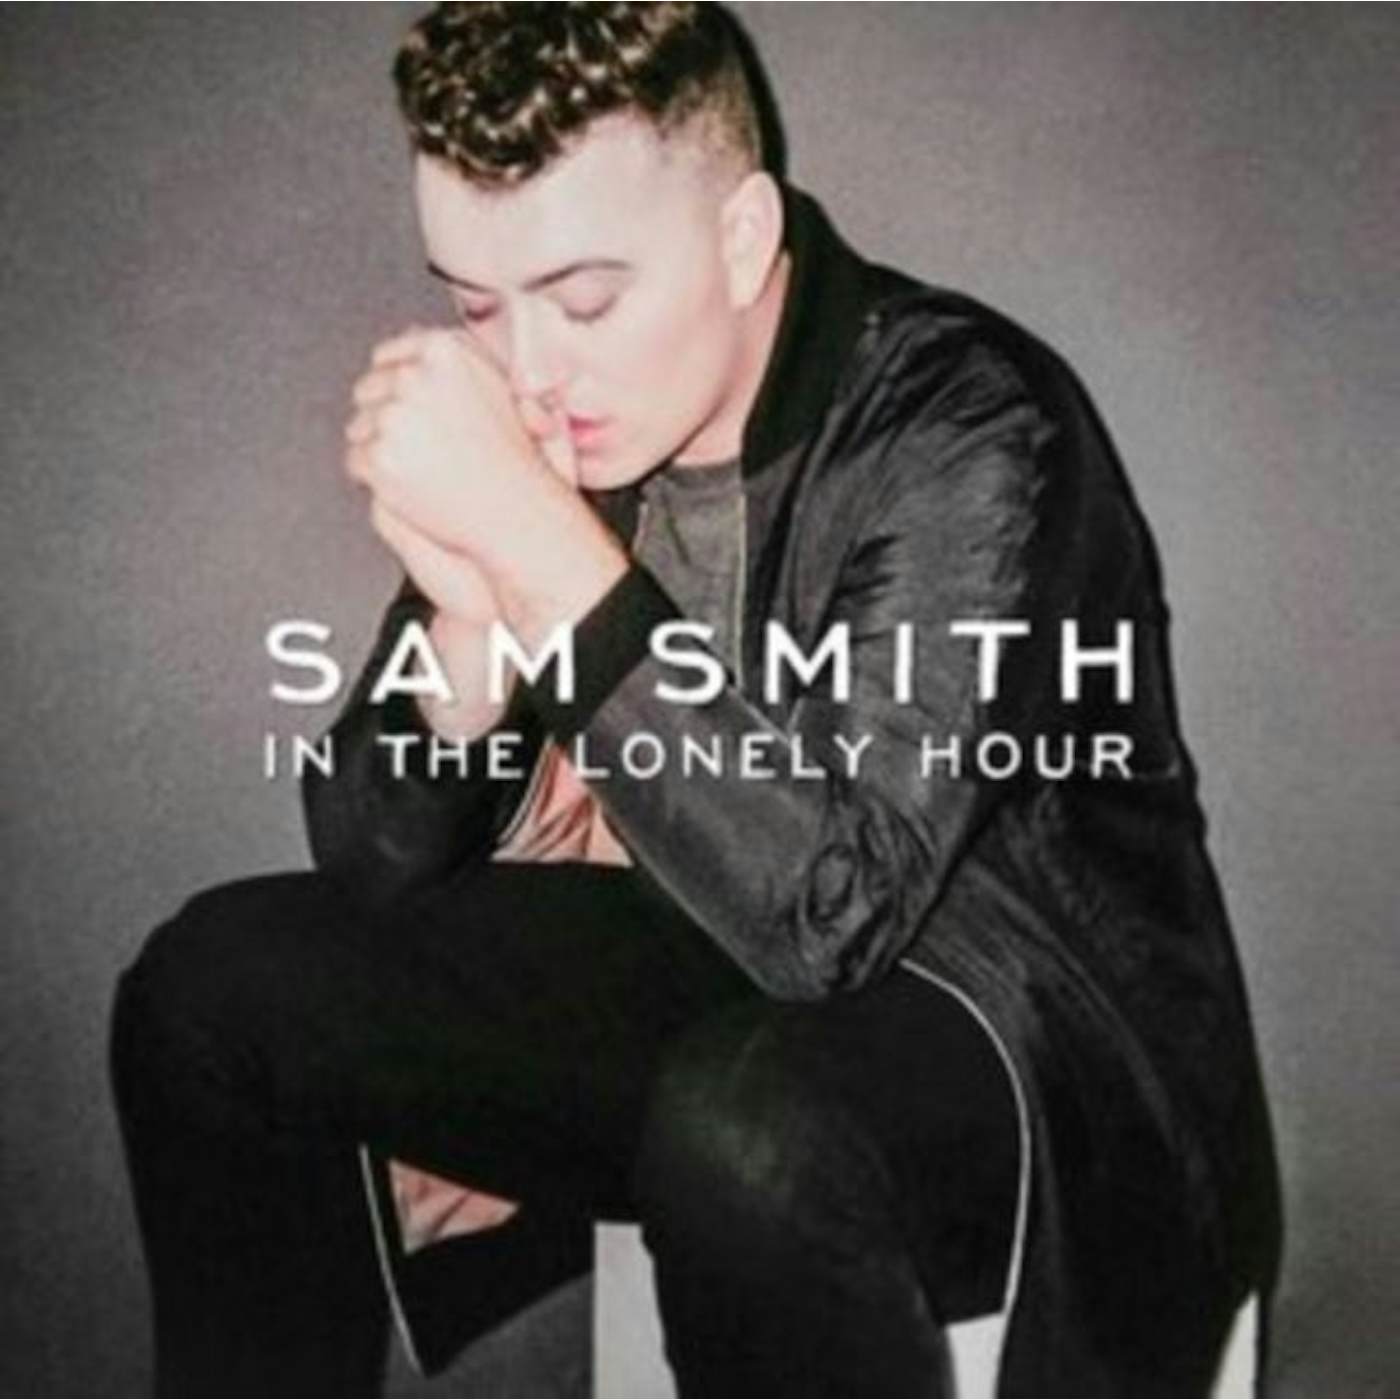 Sam Smith LP Vinyl Record - In The Lonely Hour